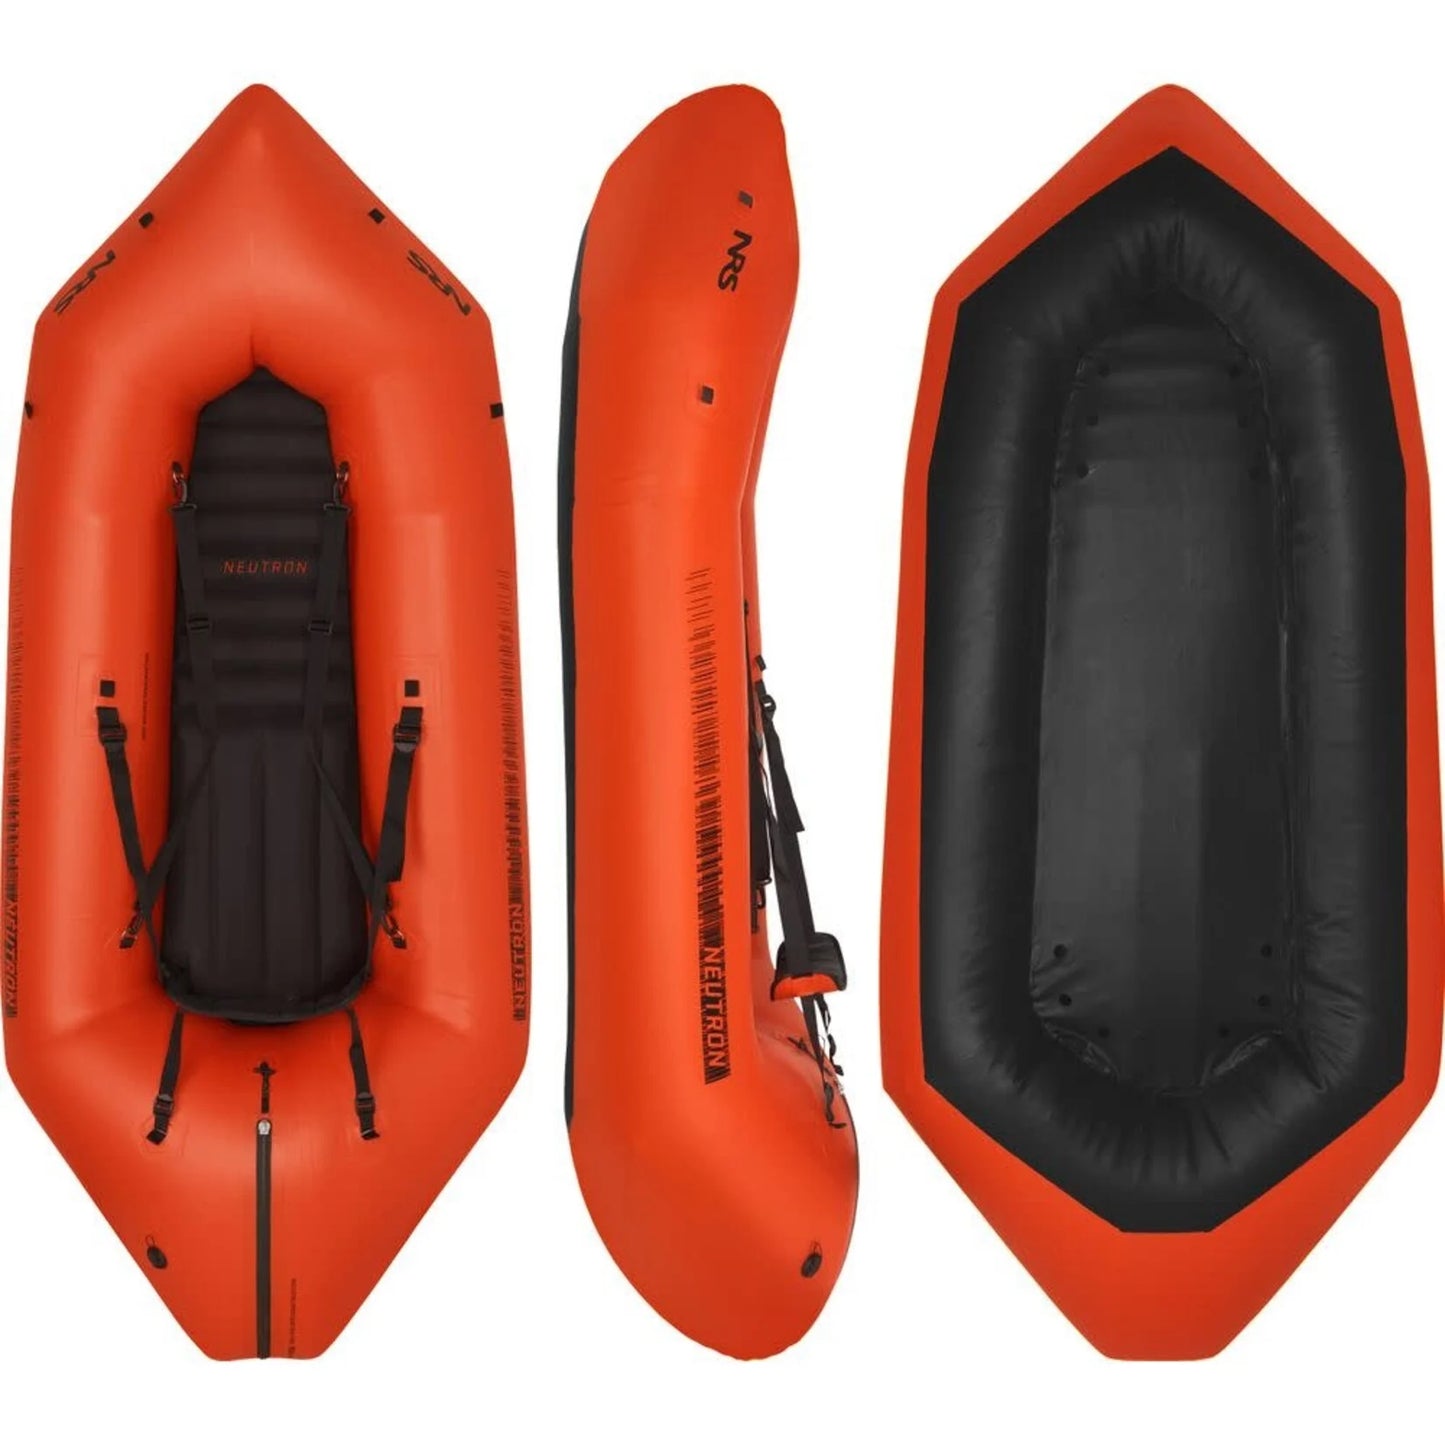 An orange and black NRS Neutron Packraft with two seats, perfect for whitewater journeys.